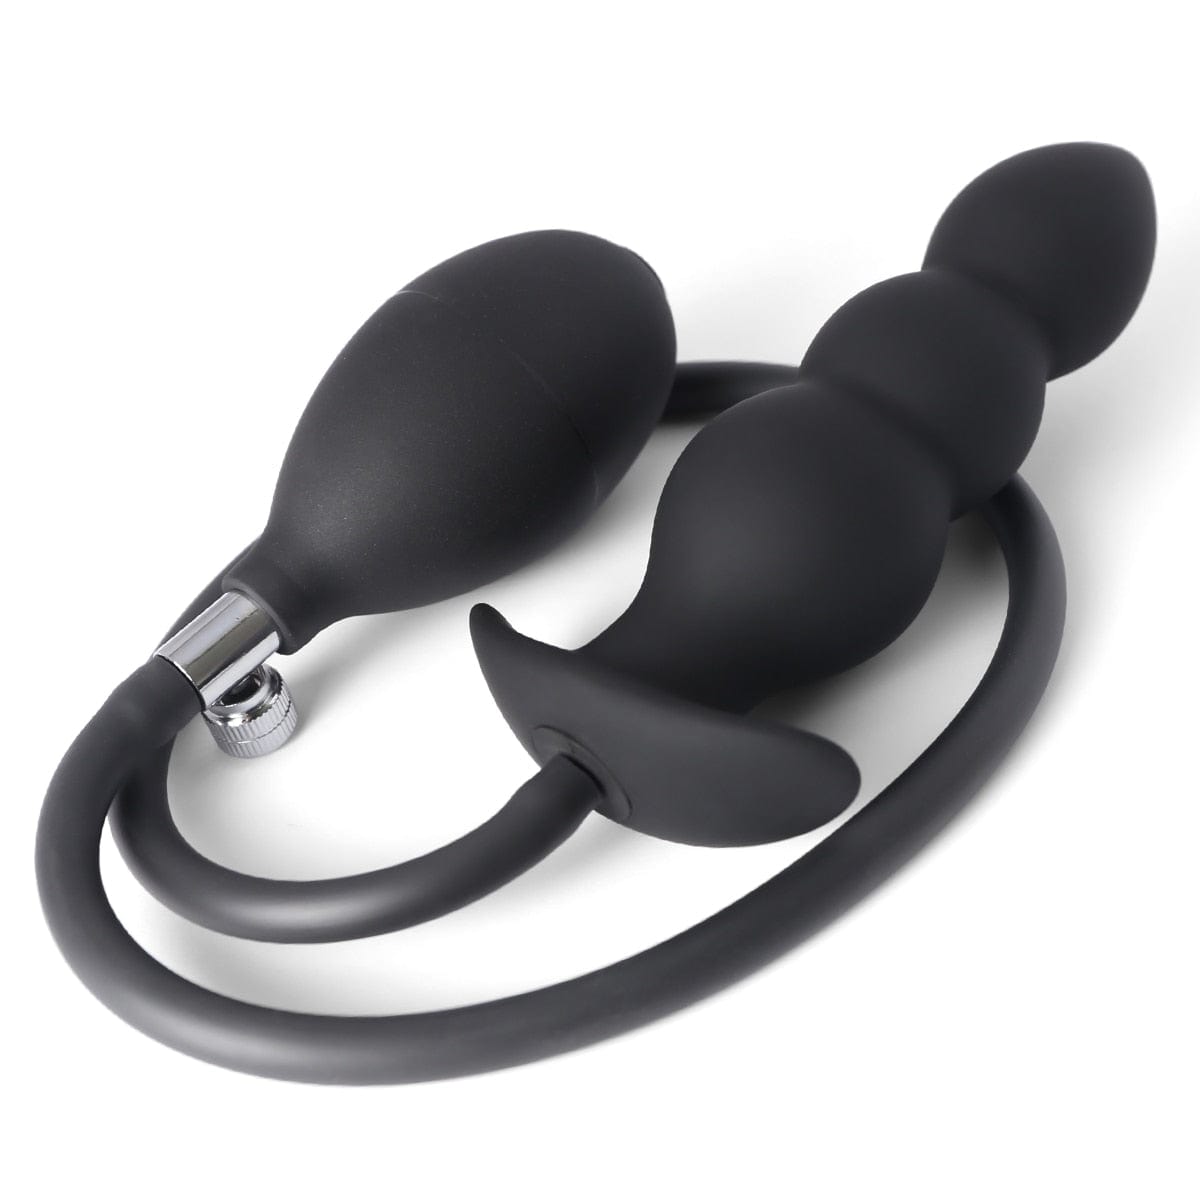 Inflatable Anal Massager Male Masturbation Toy